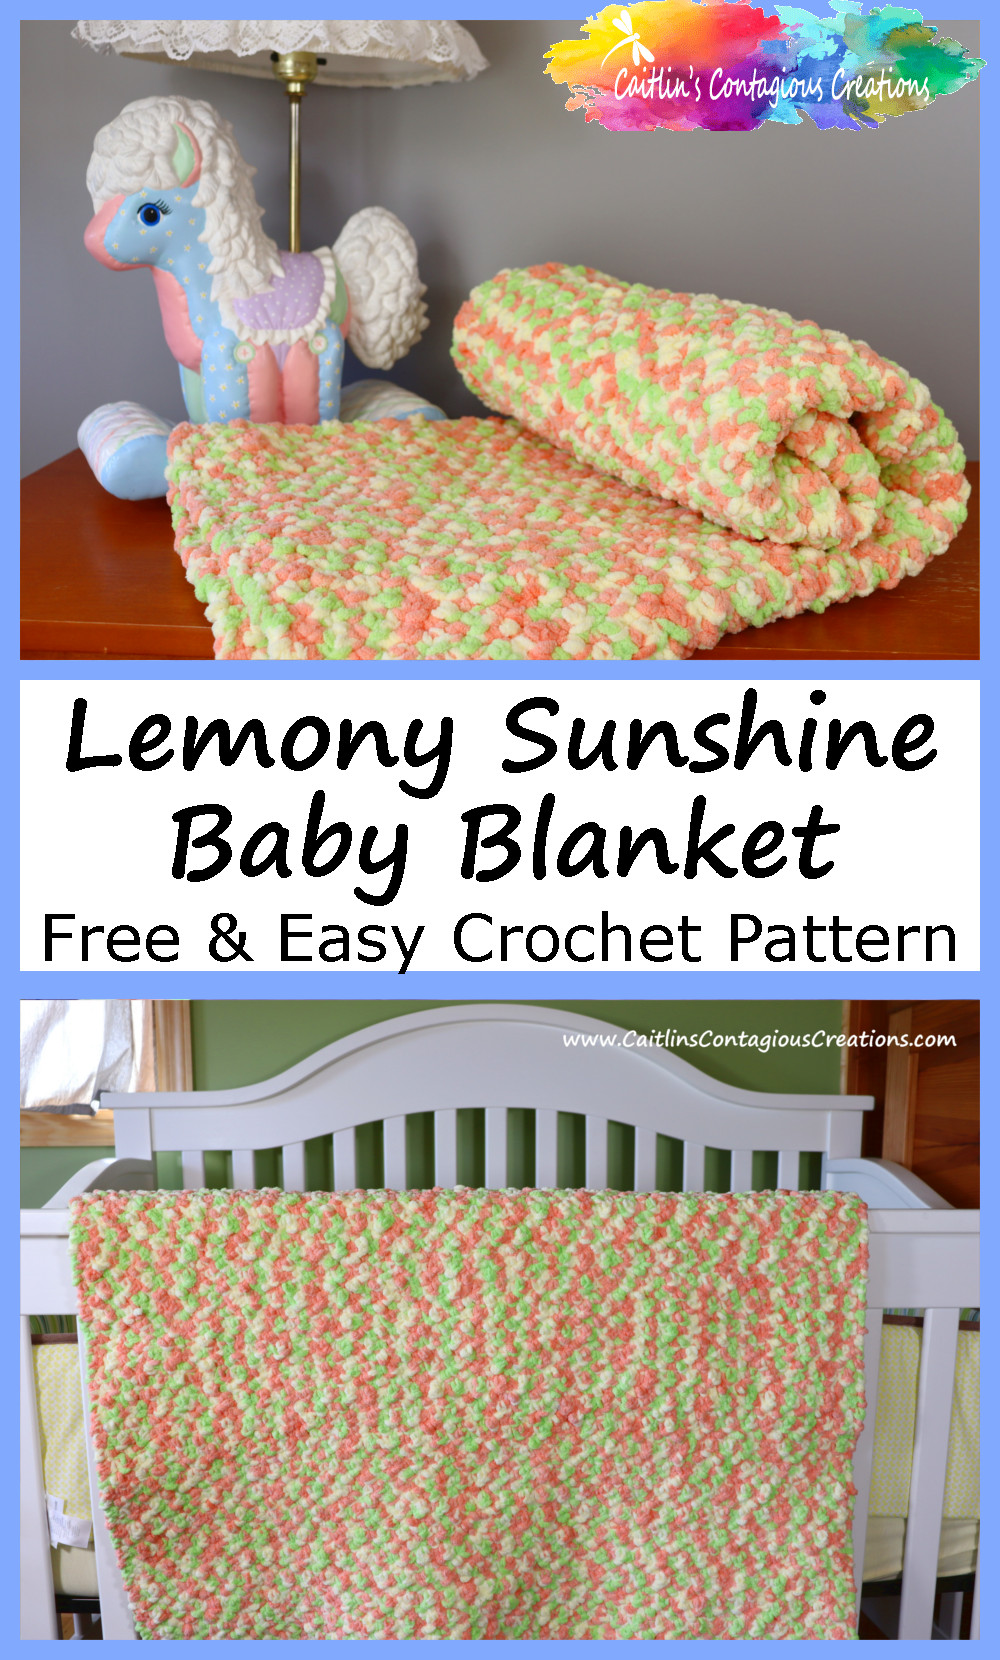 pinnable image of super bulk baby blanket crochet pattern showing blanket in use and thickness of blanket